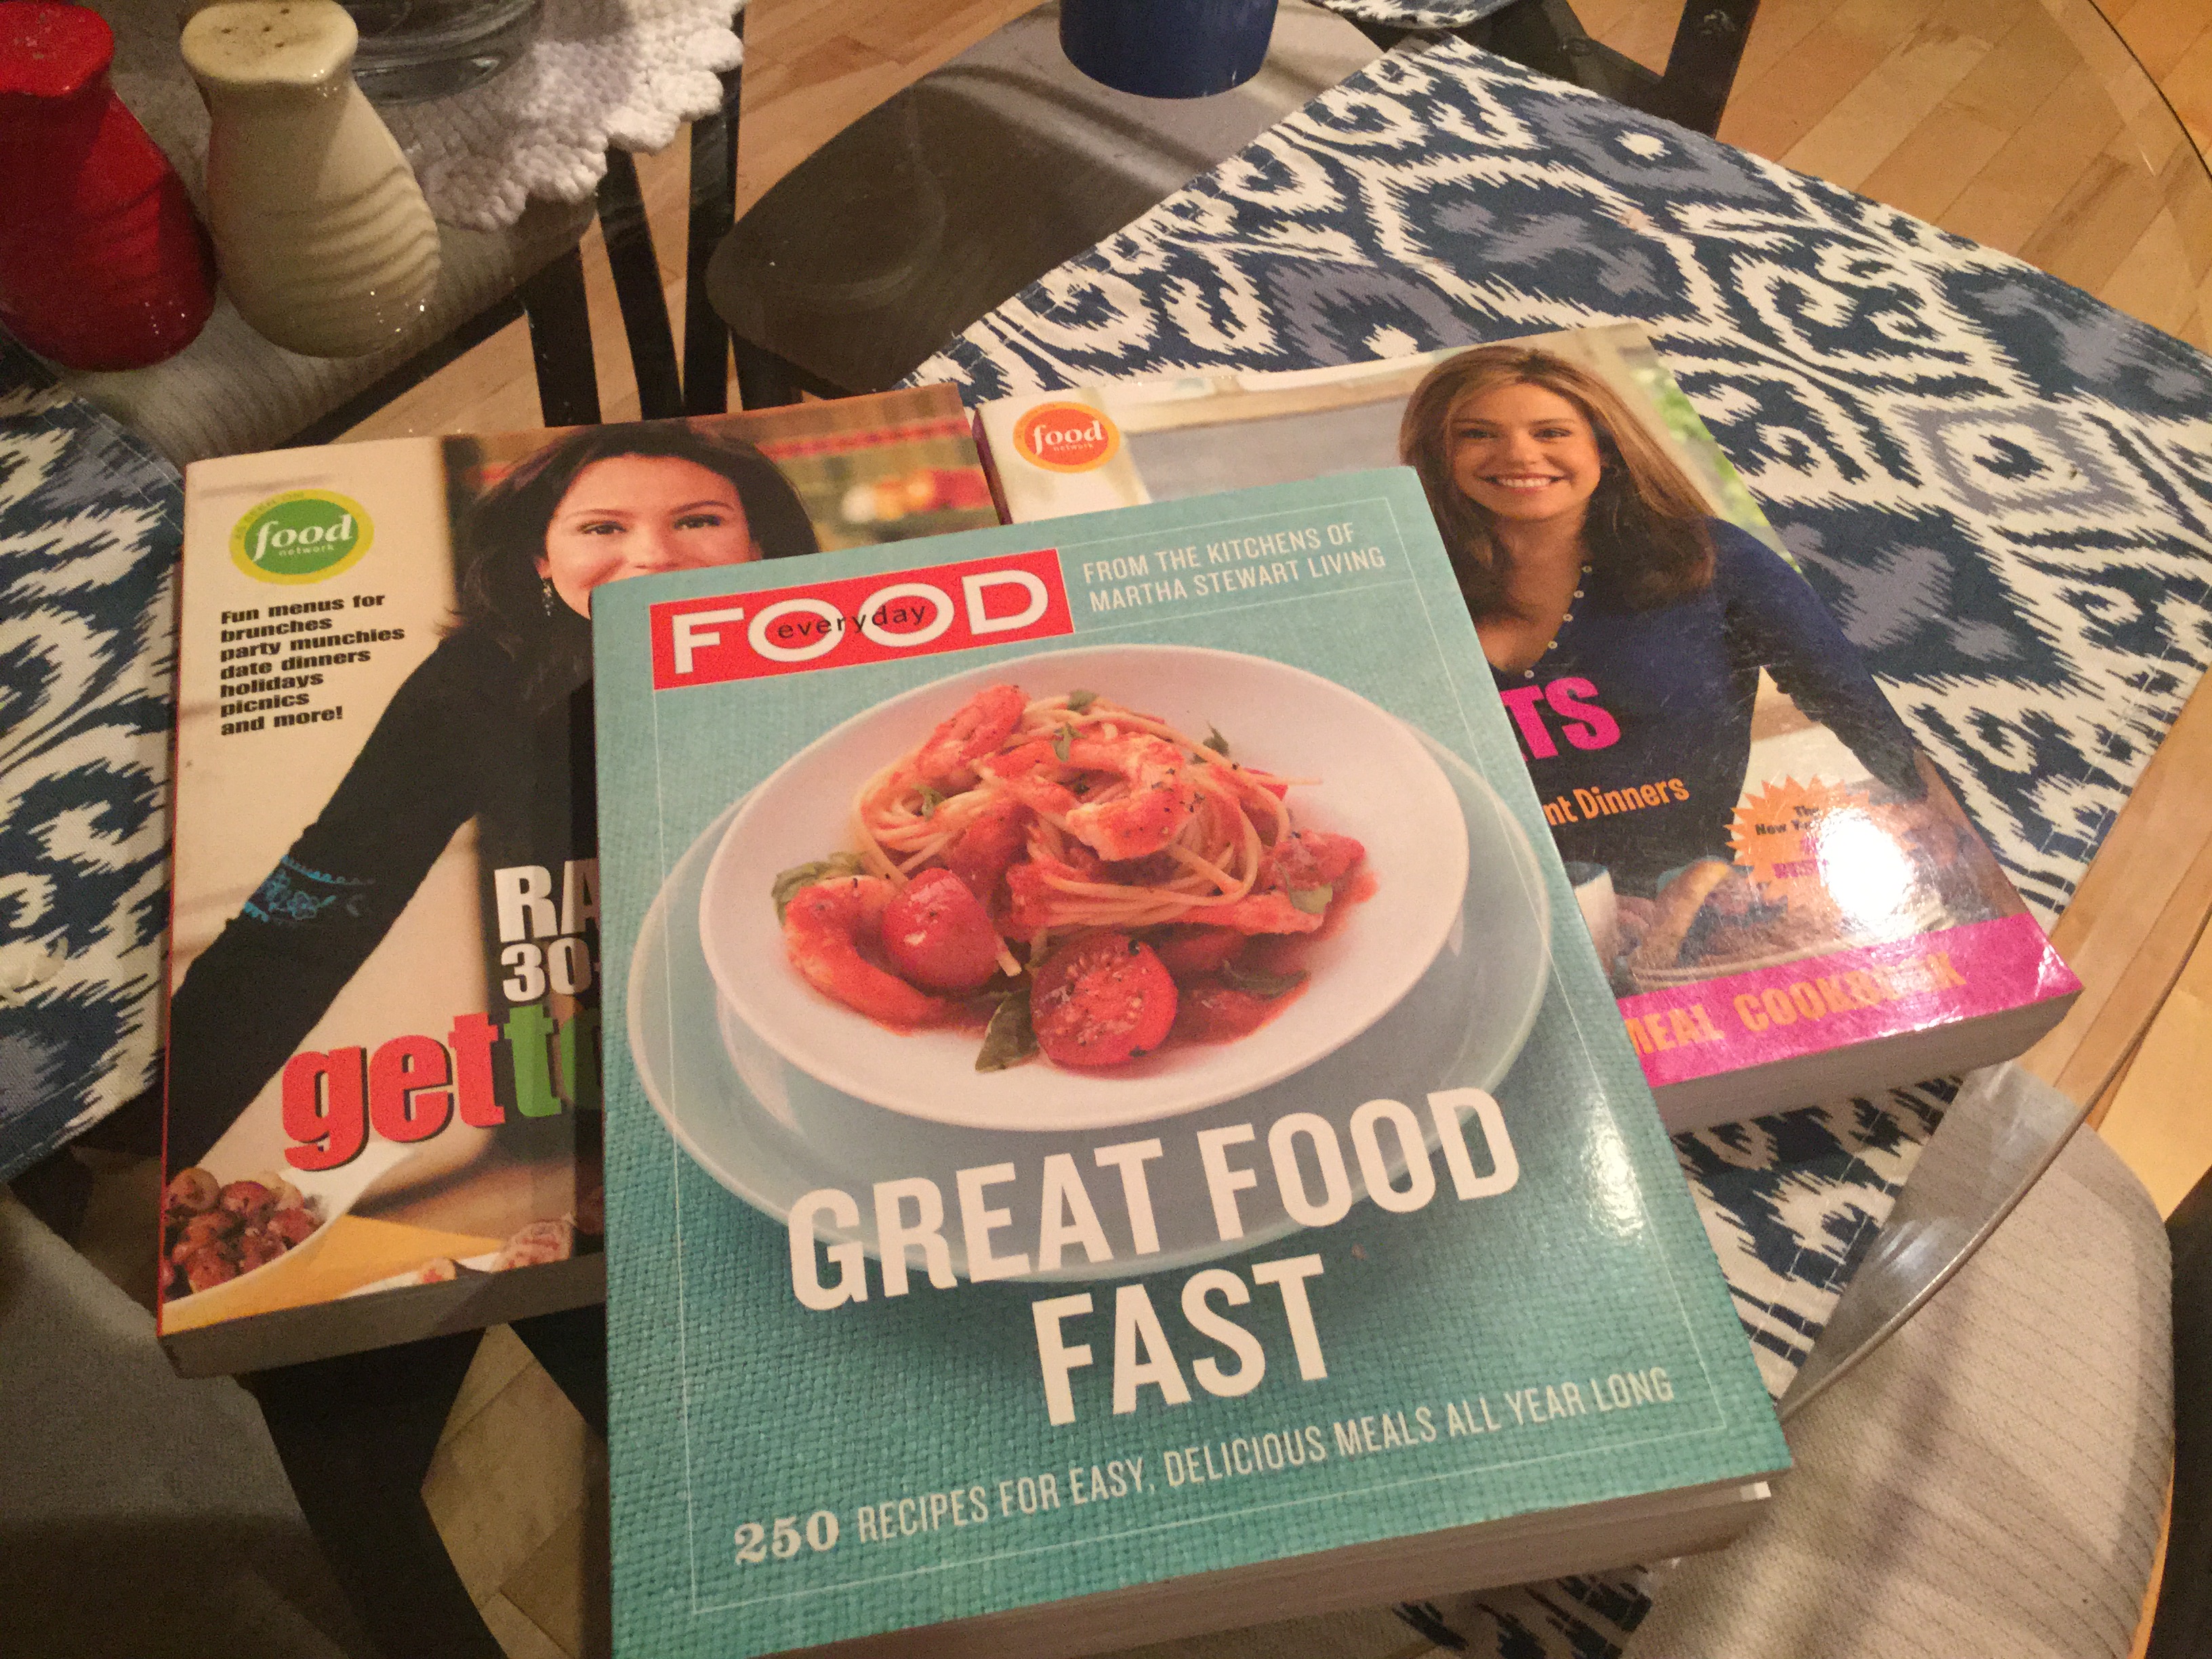 Ny new cookbooks from the thrift store!